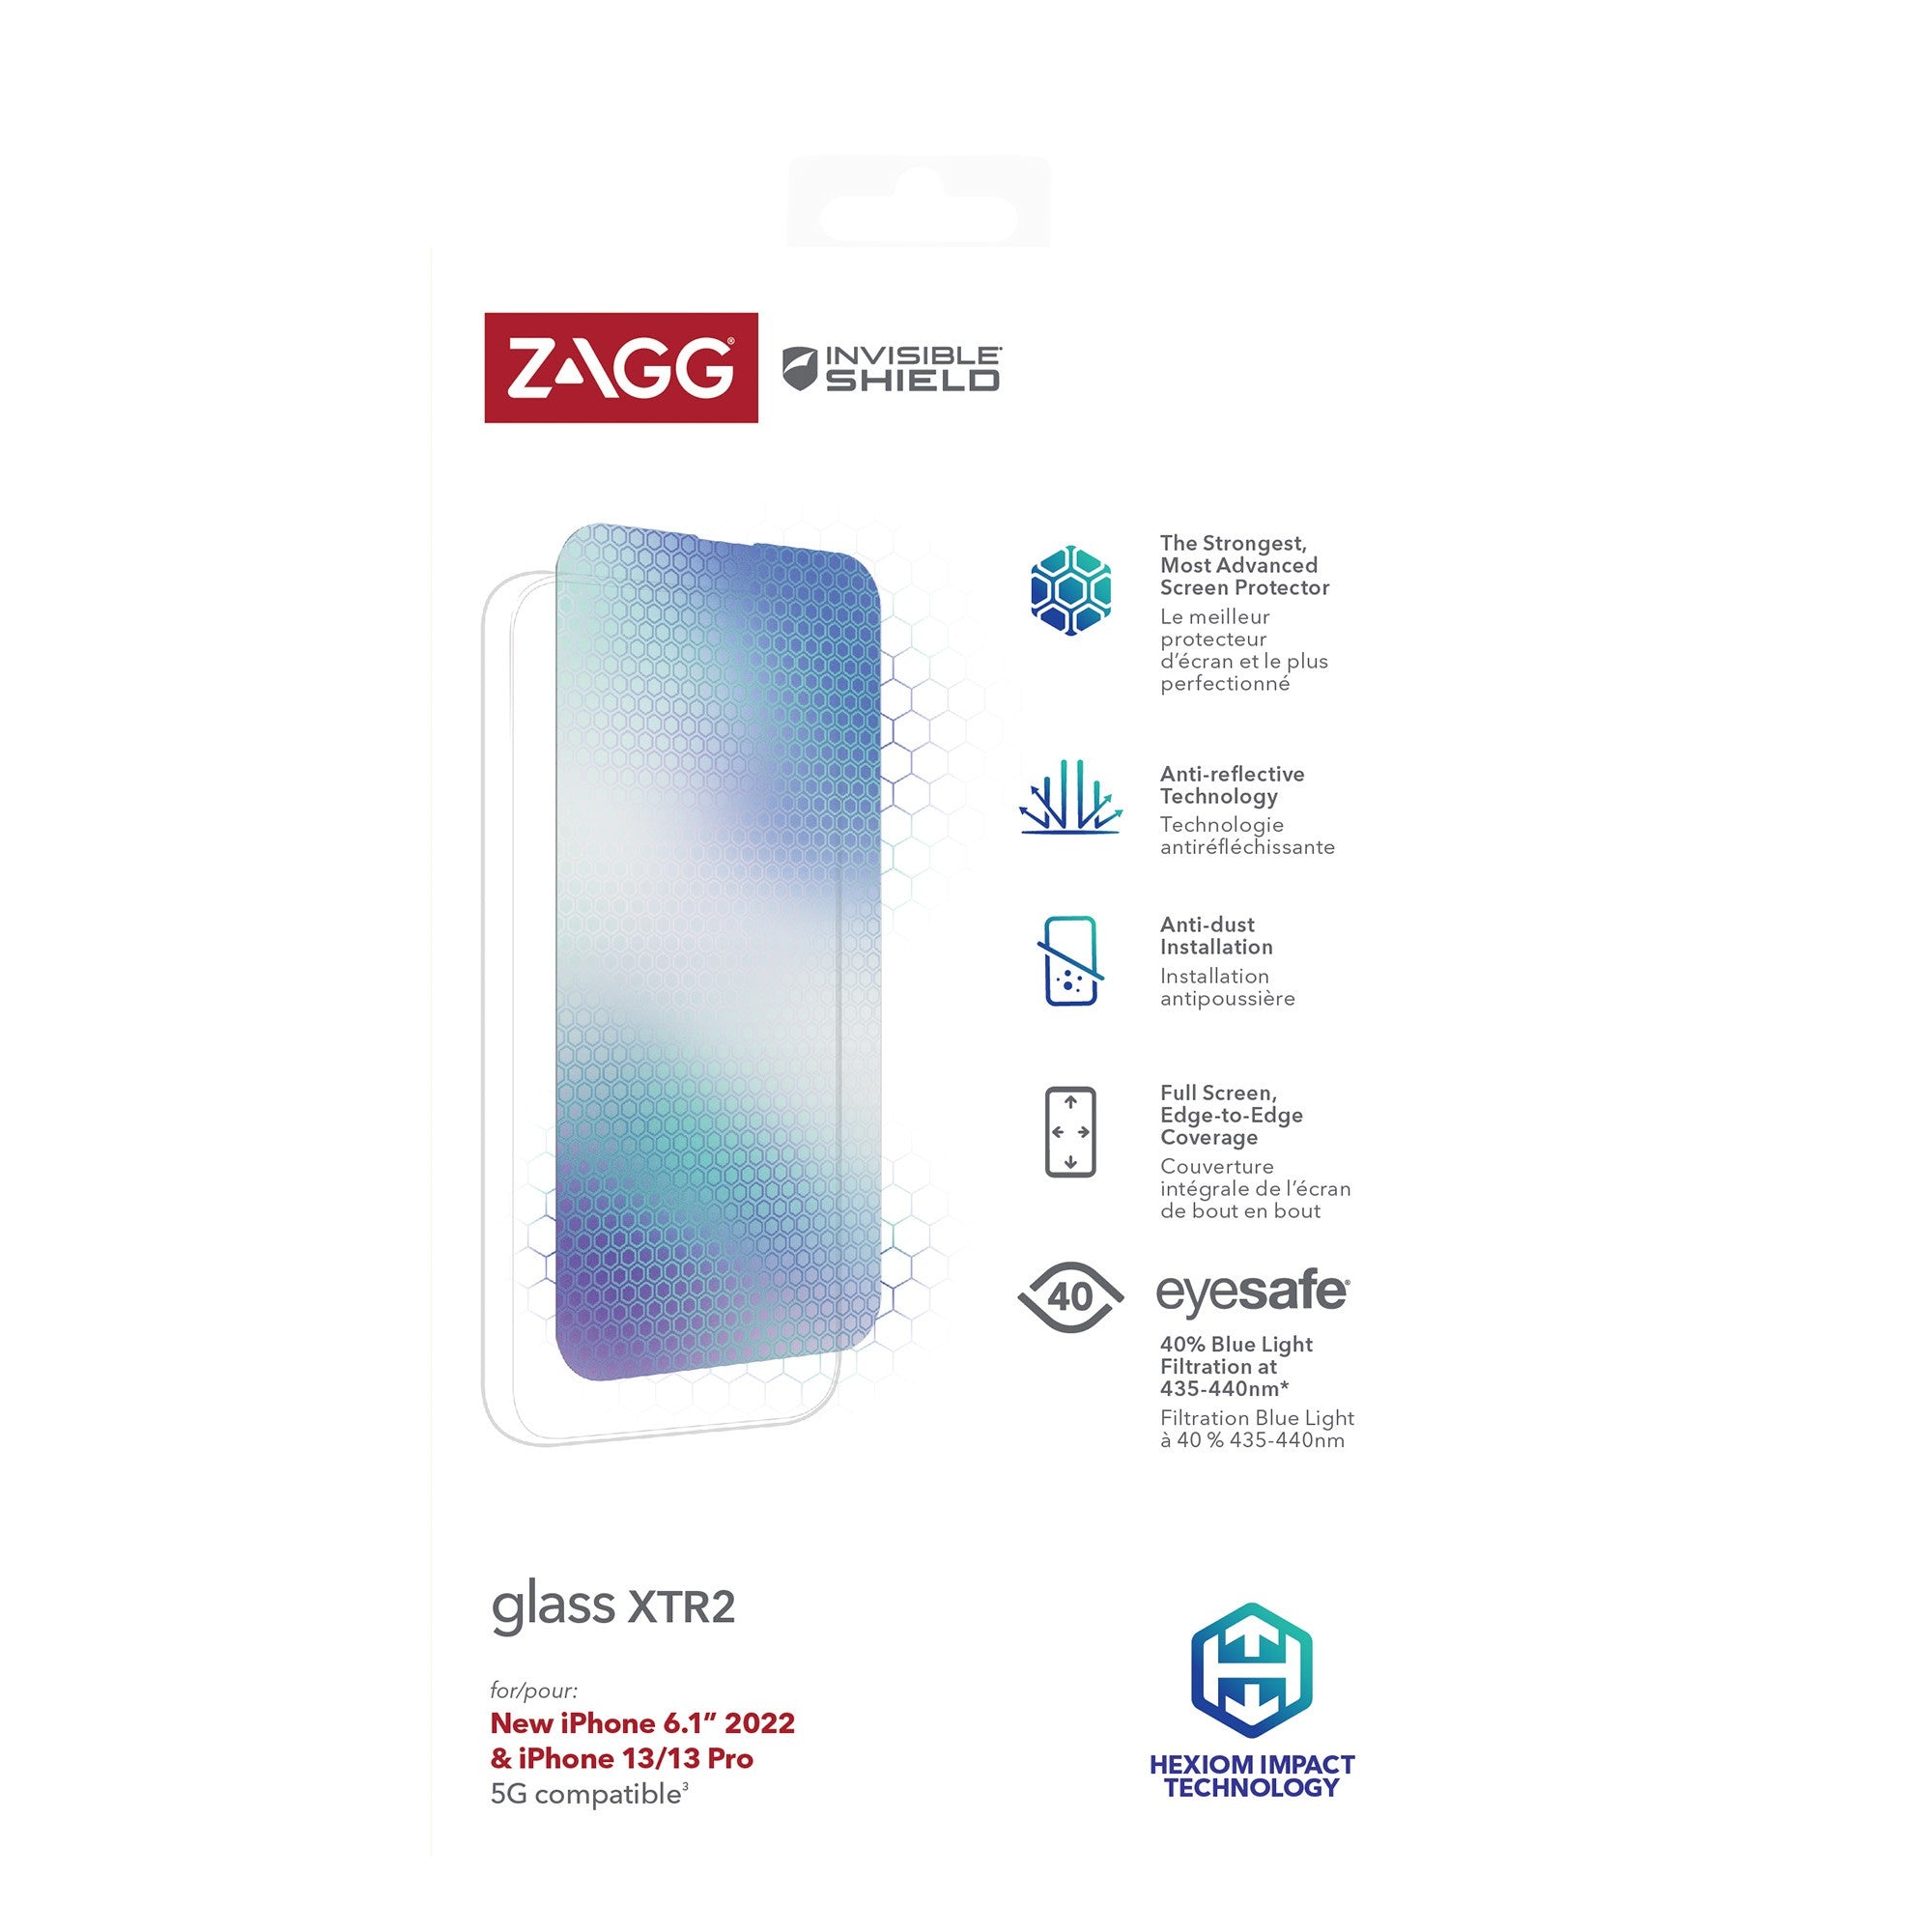 iPhone 14/13/13 Pro ZAGG InvisibleShield Glass XTR2 Screen Protector - 15-10497